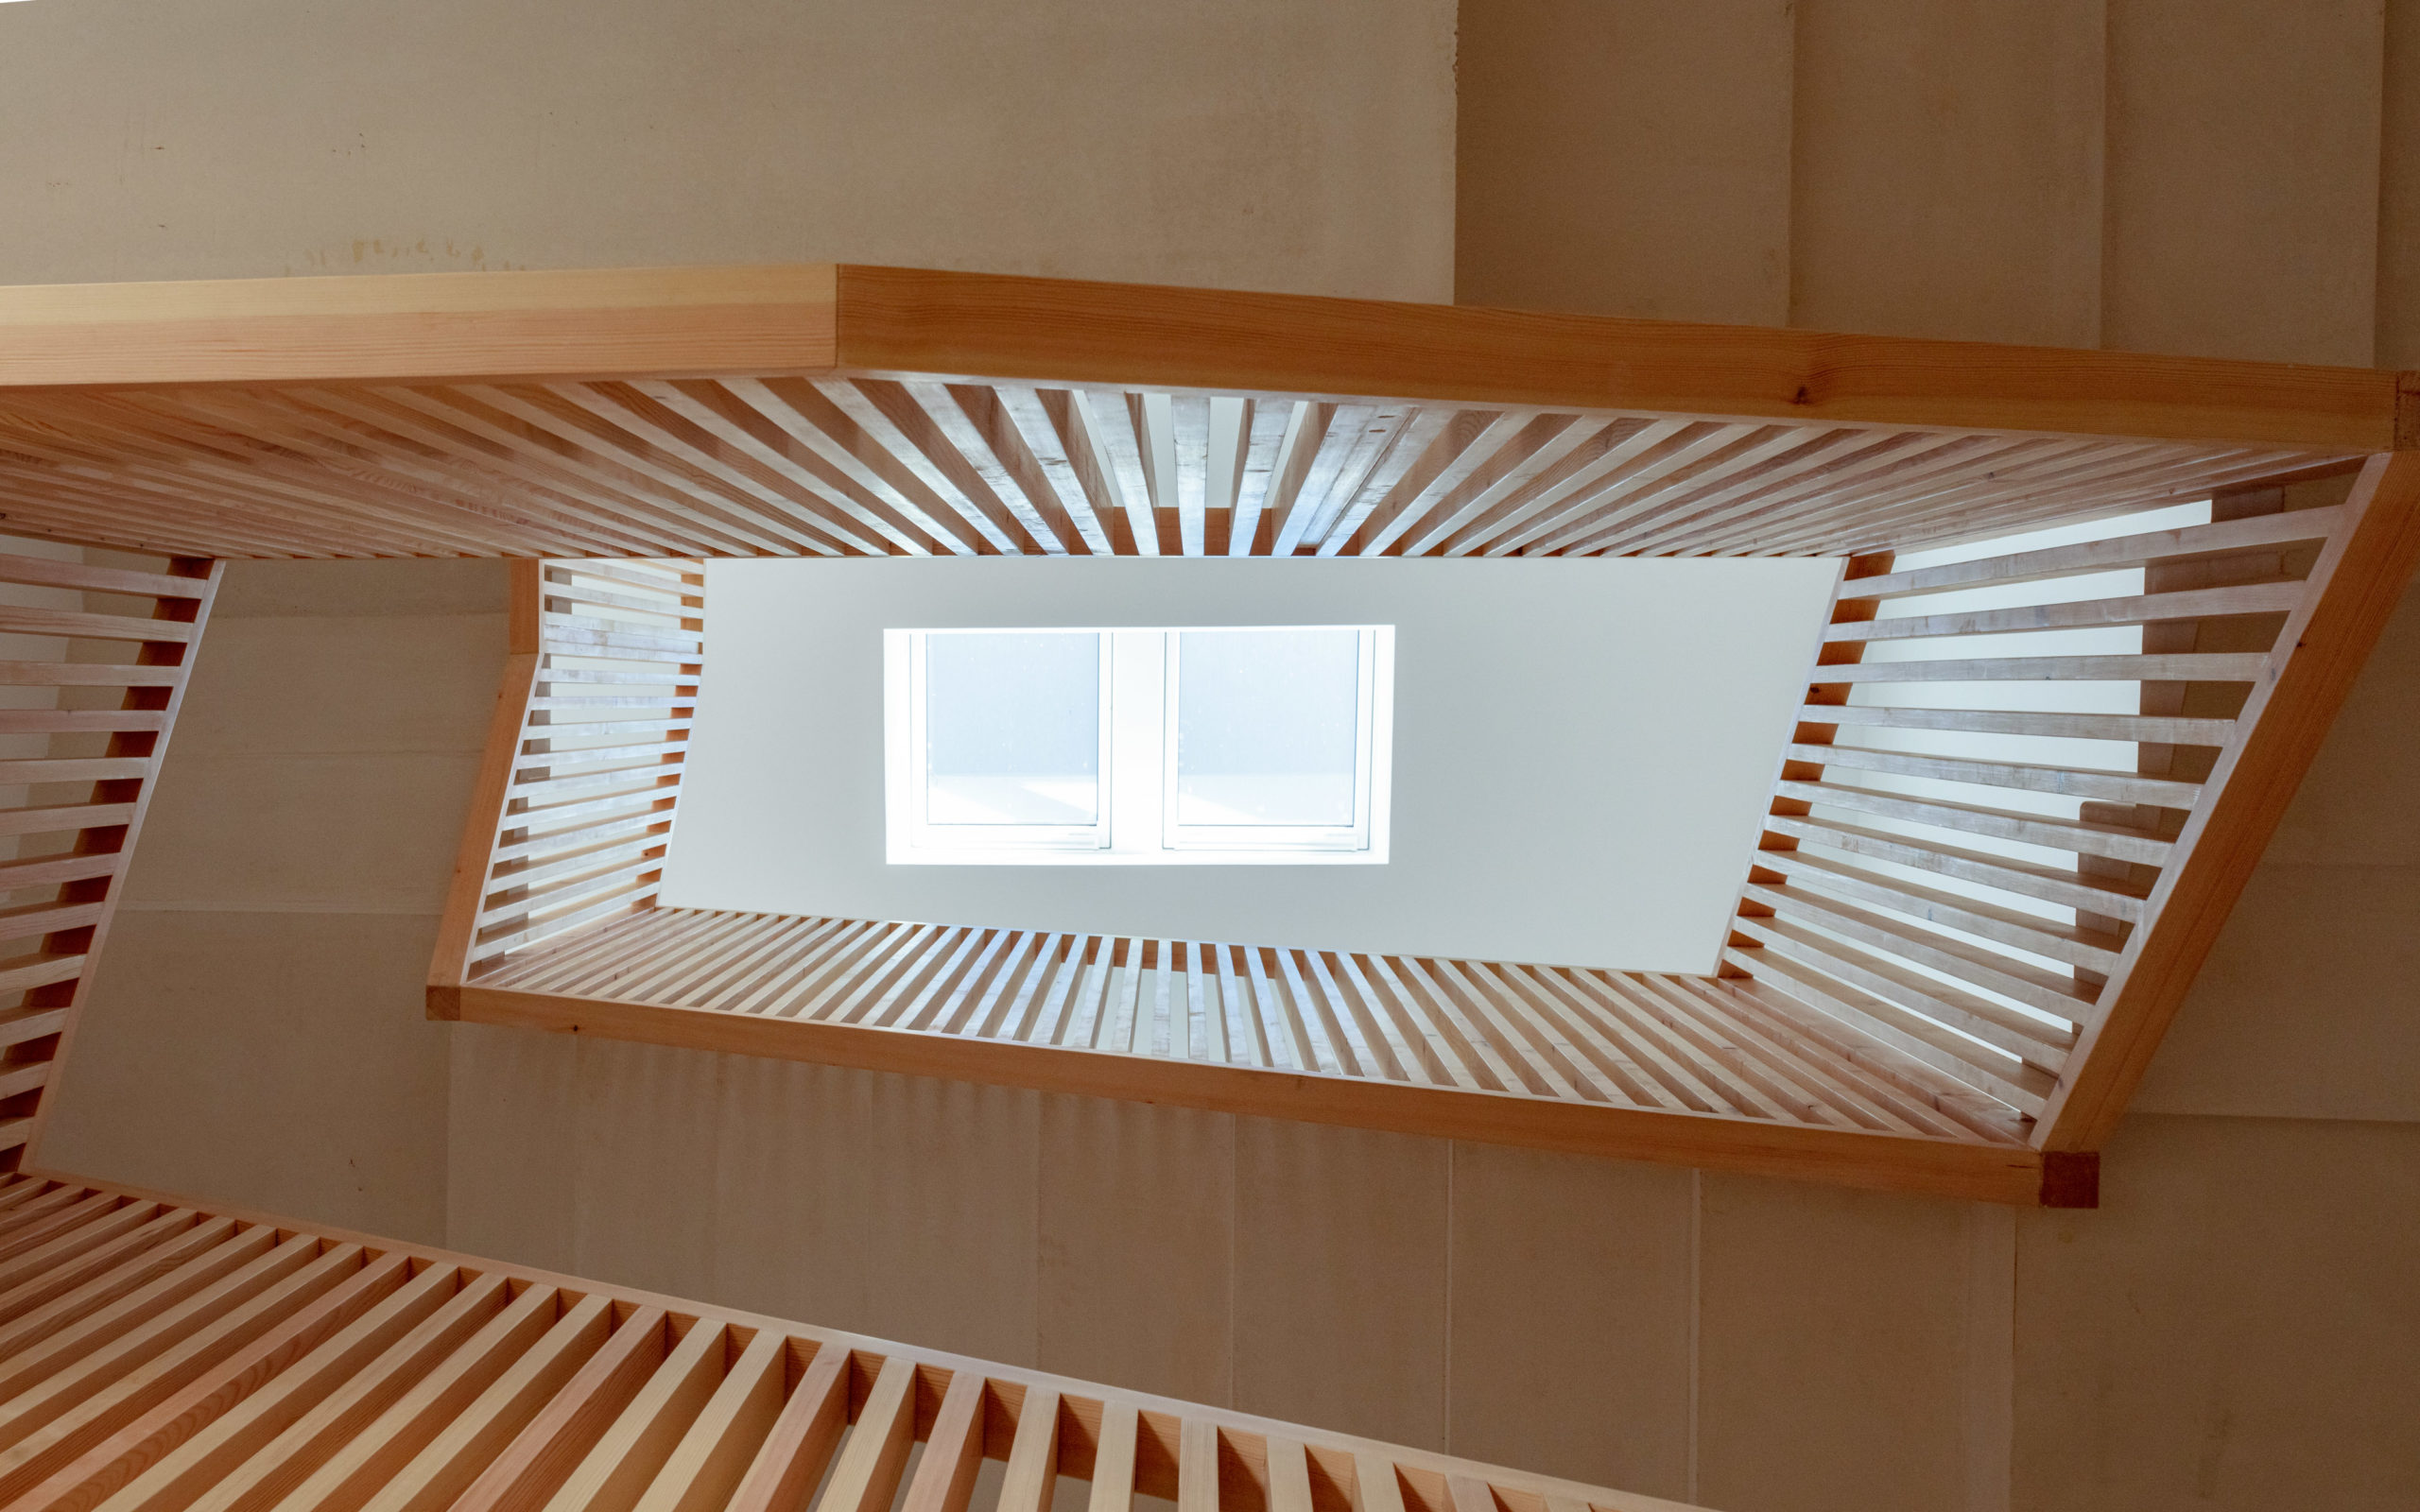 A new wooden stairway with a skylight was created leading up to the more private part of the house with the bedrooms.